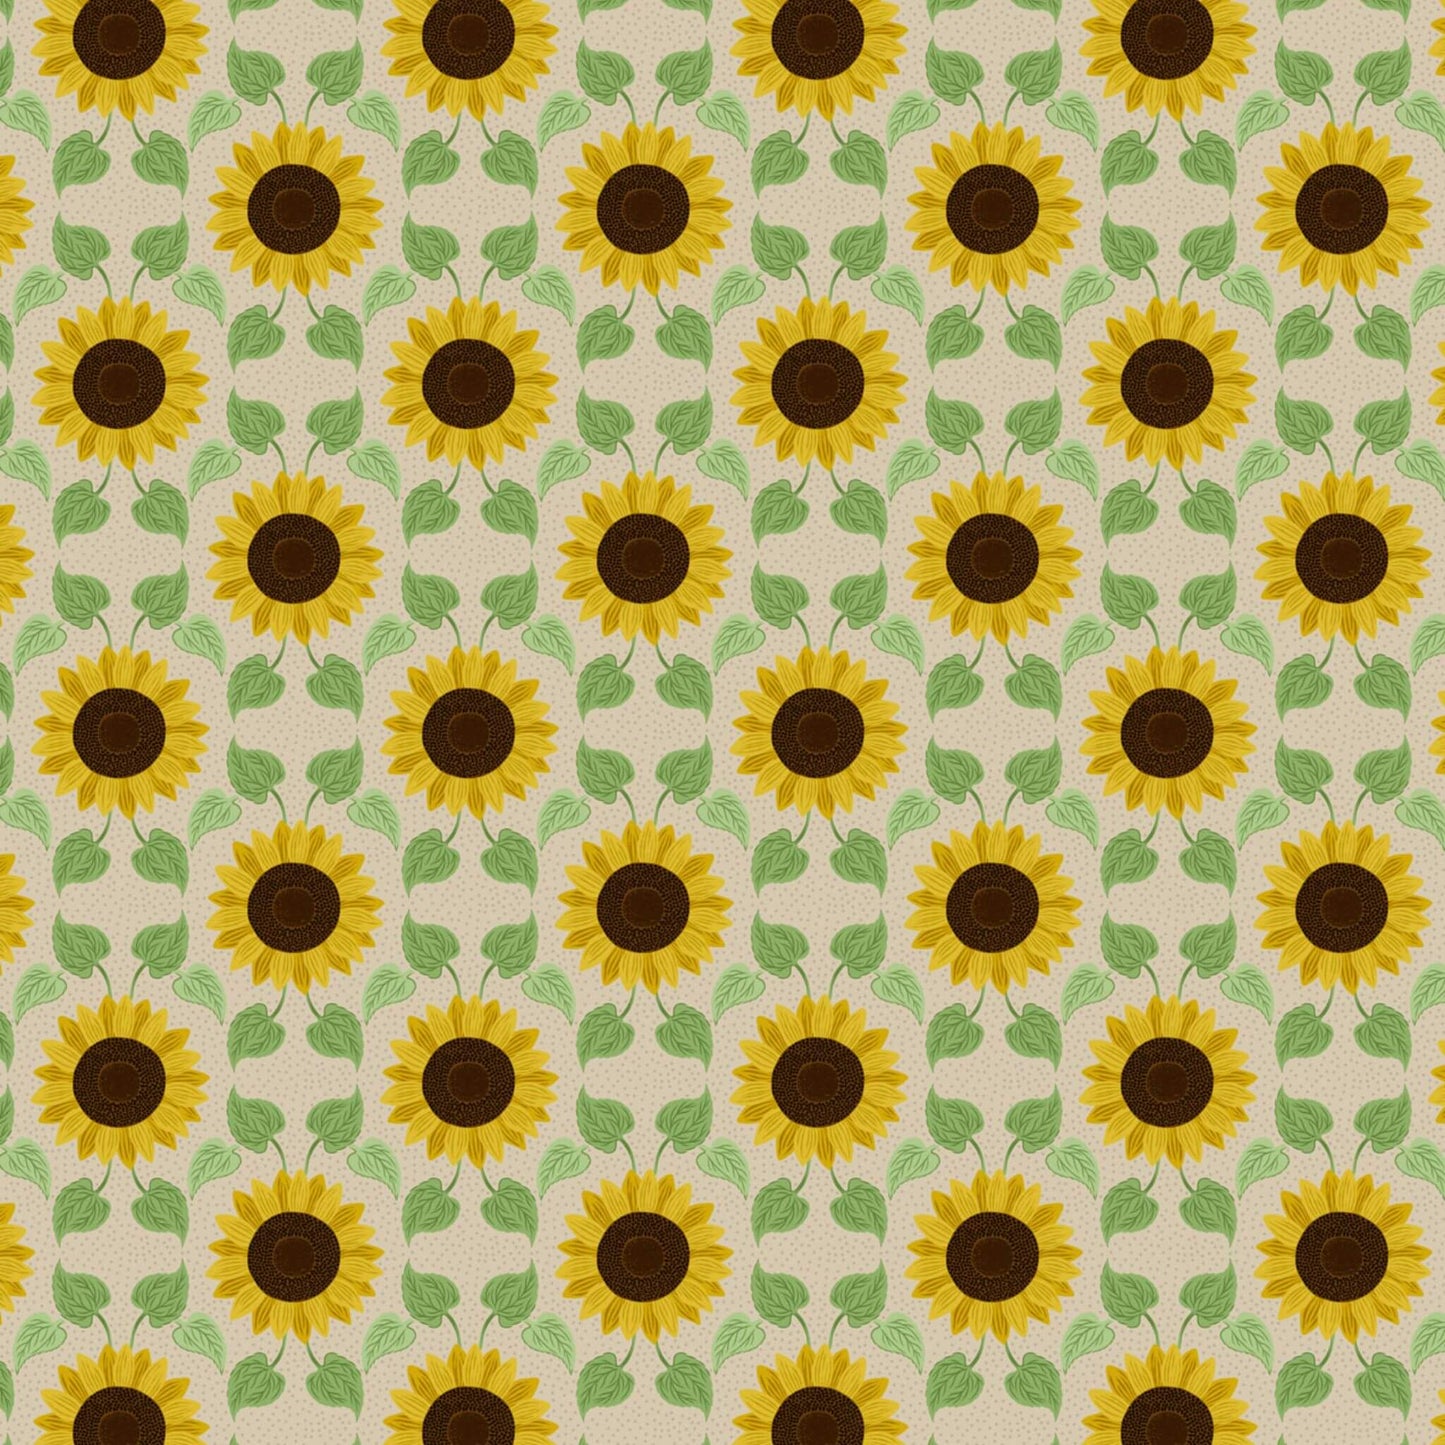 Sunflowers with Leaves  (A746.3) - Sunflowers Fabric Range - Lewis and Irene - Natural